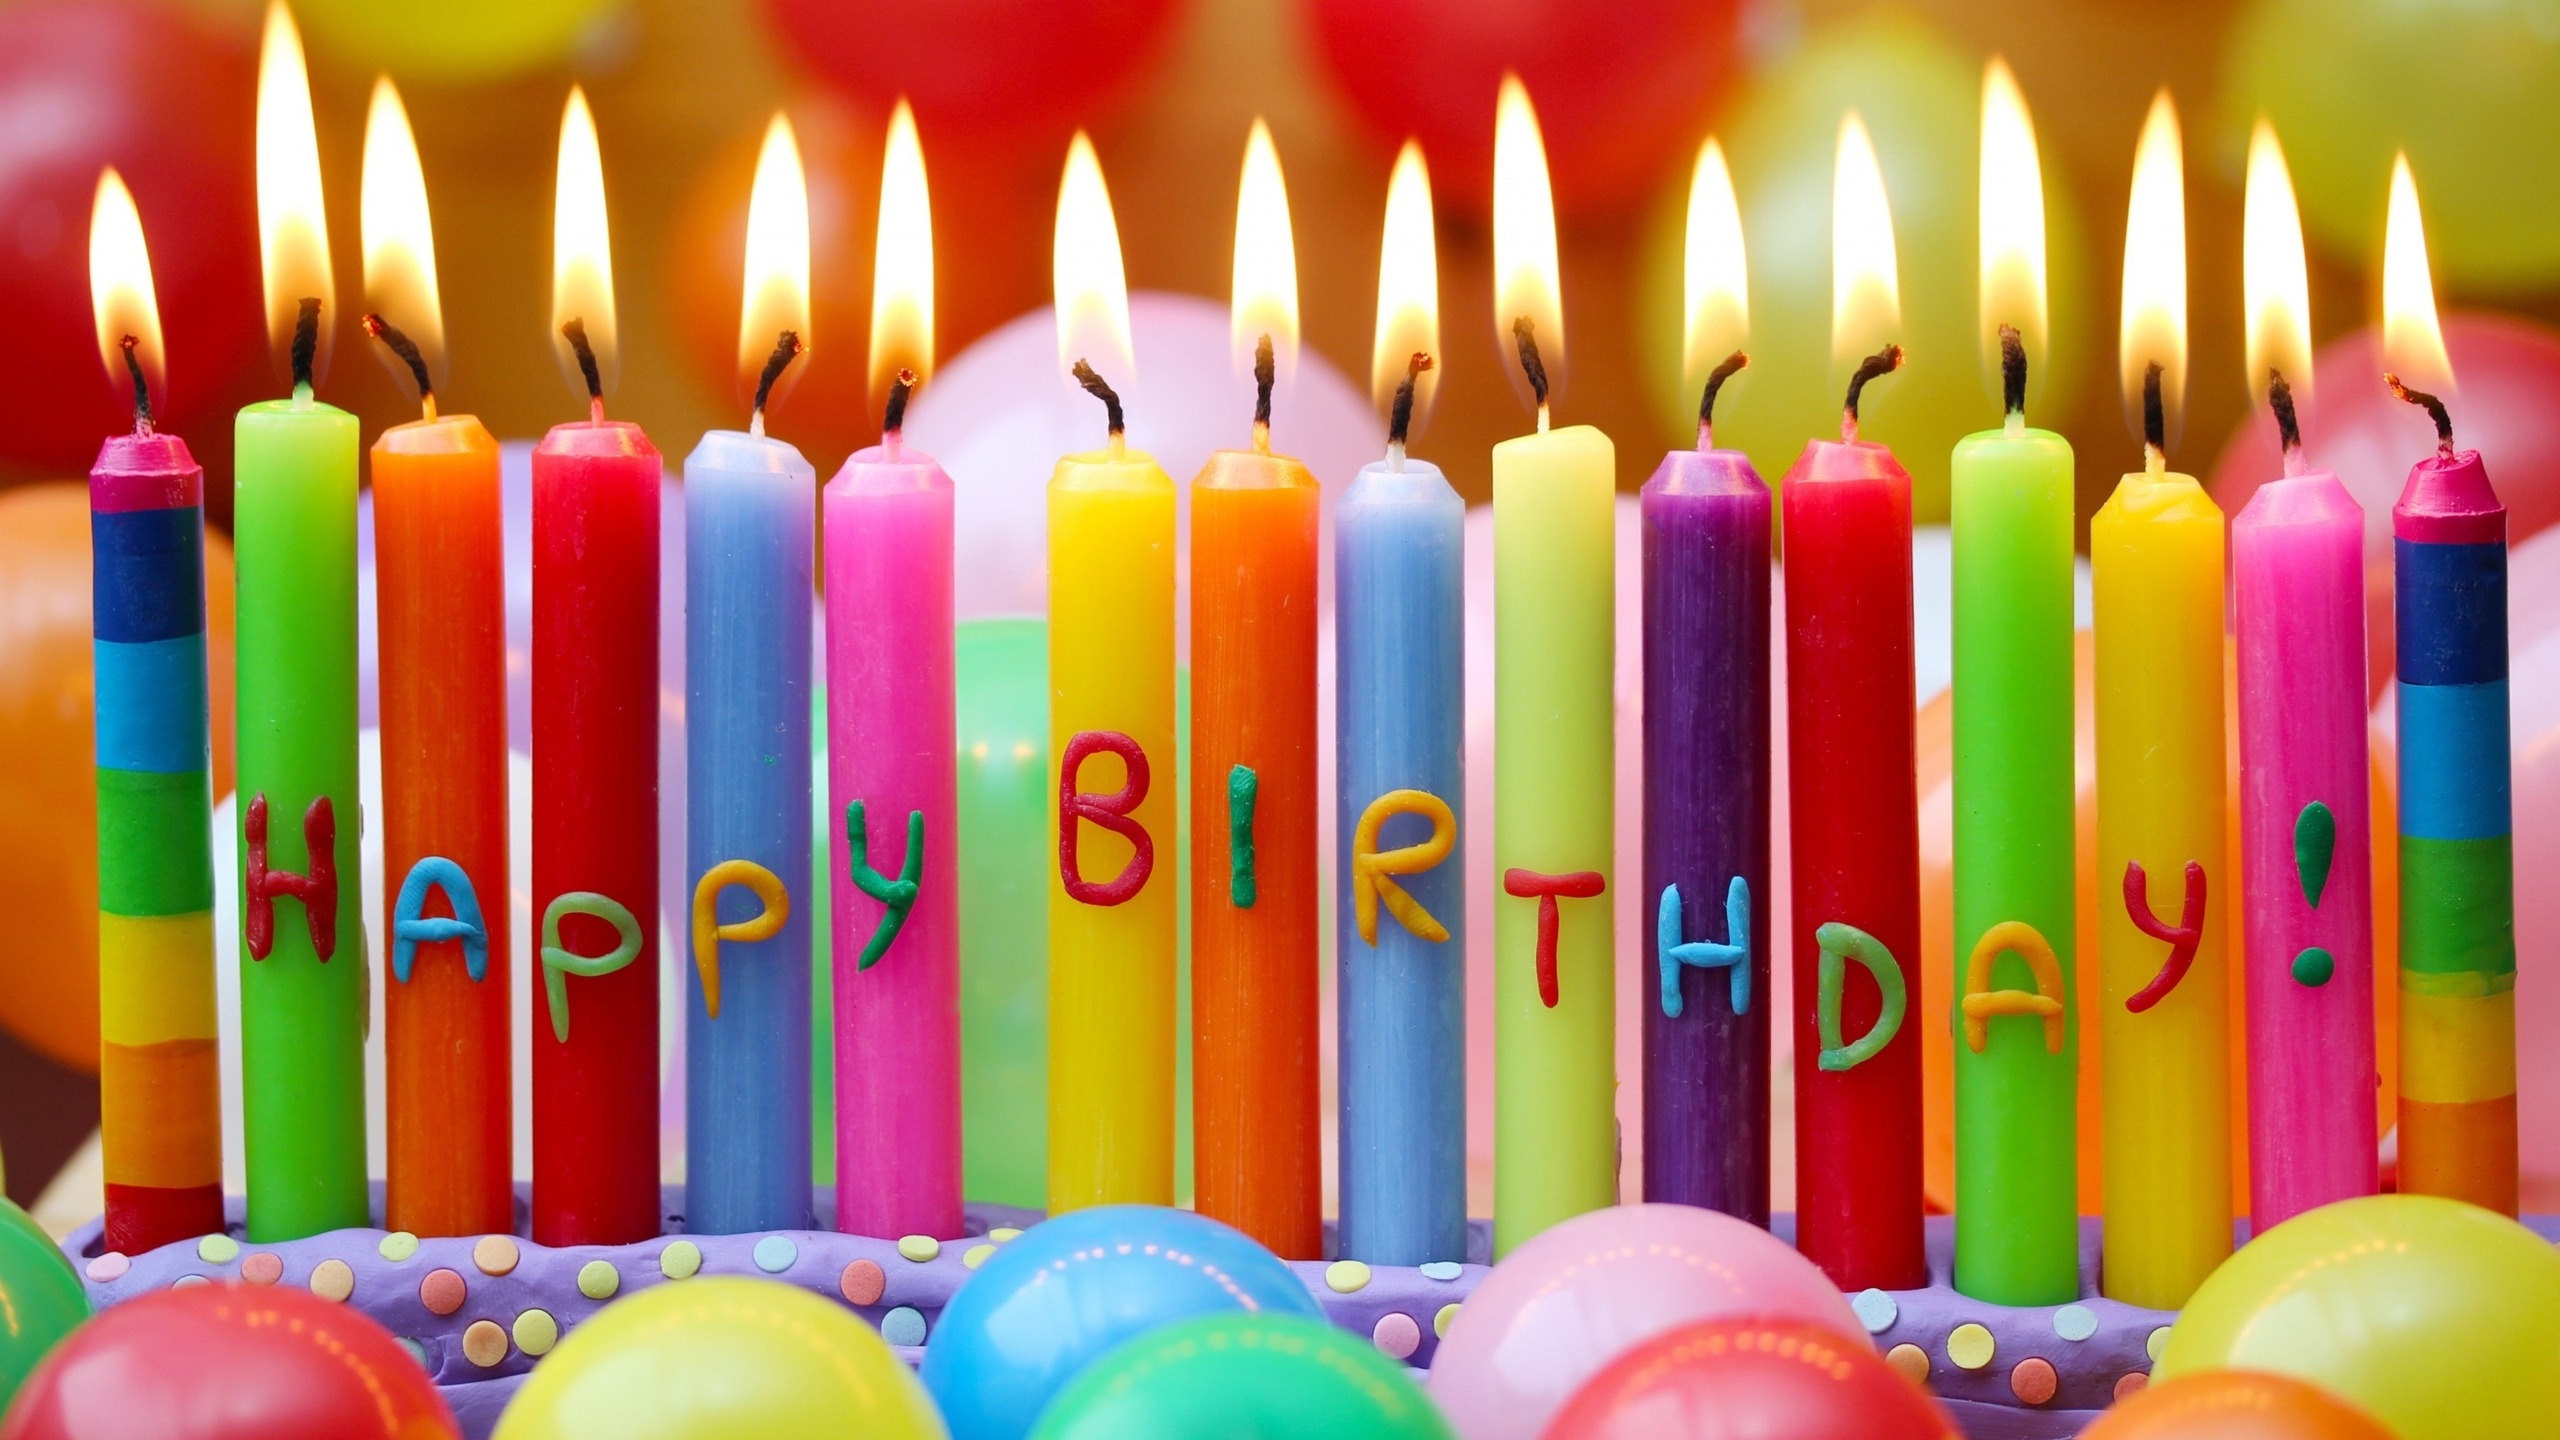 Happy Birthday Candles for 2560x1440 HDTV resolution